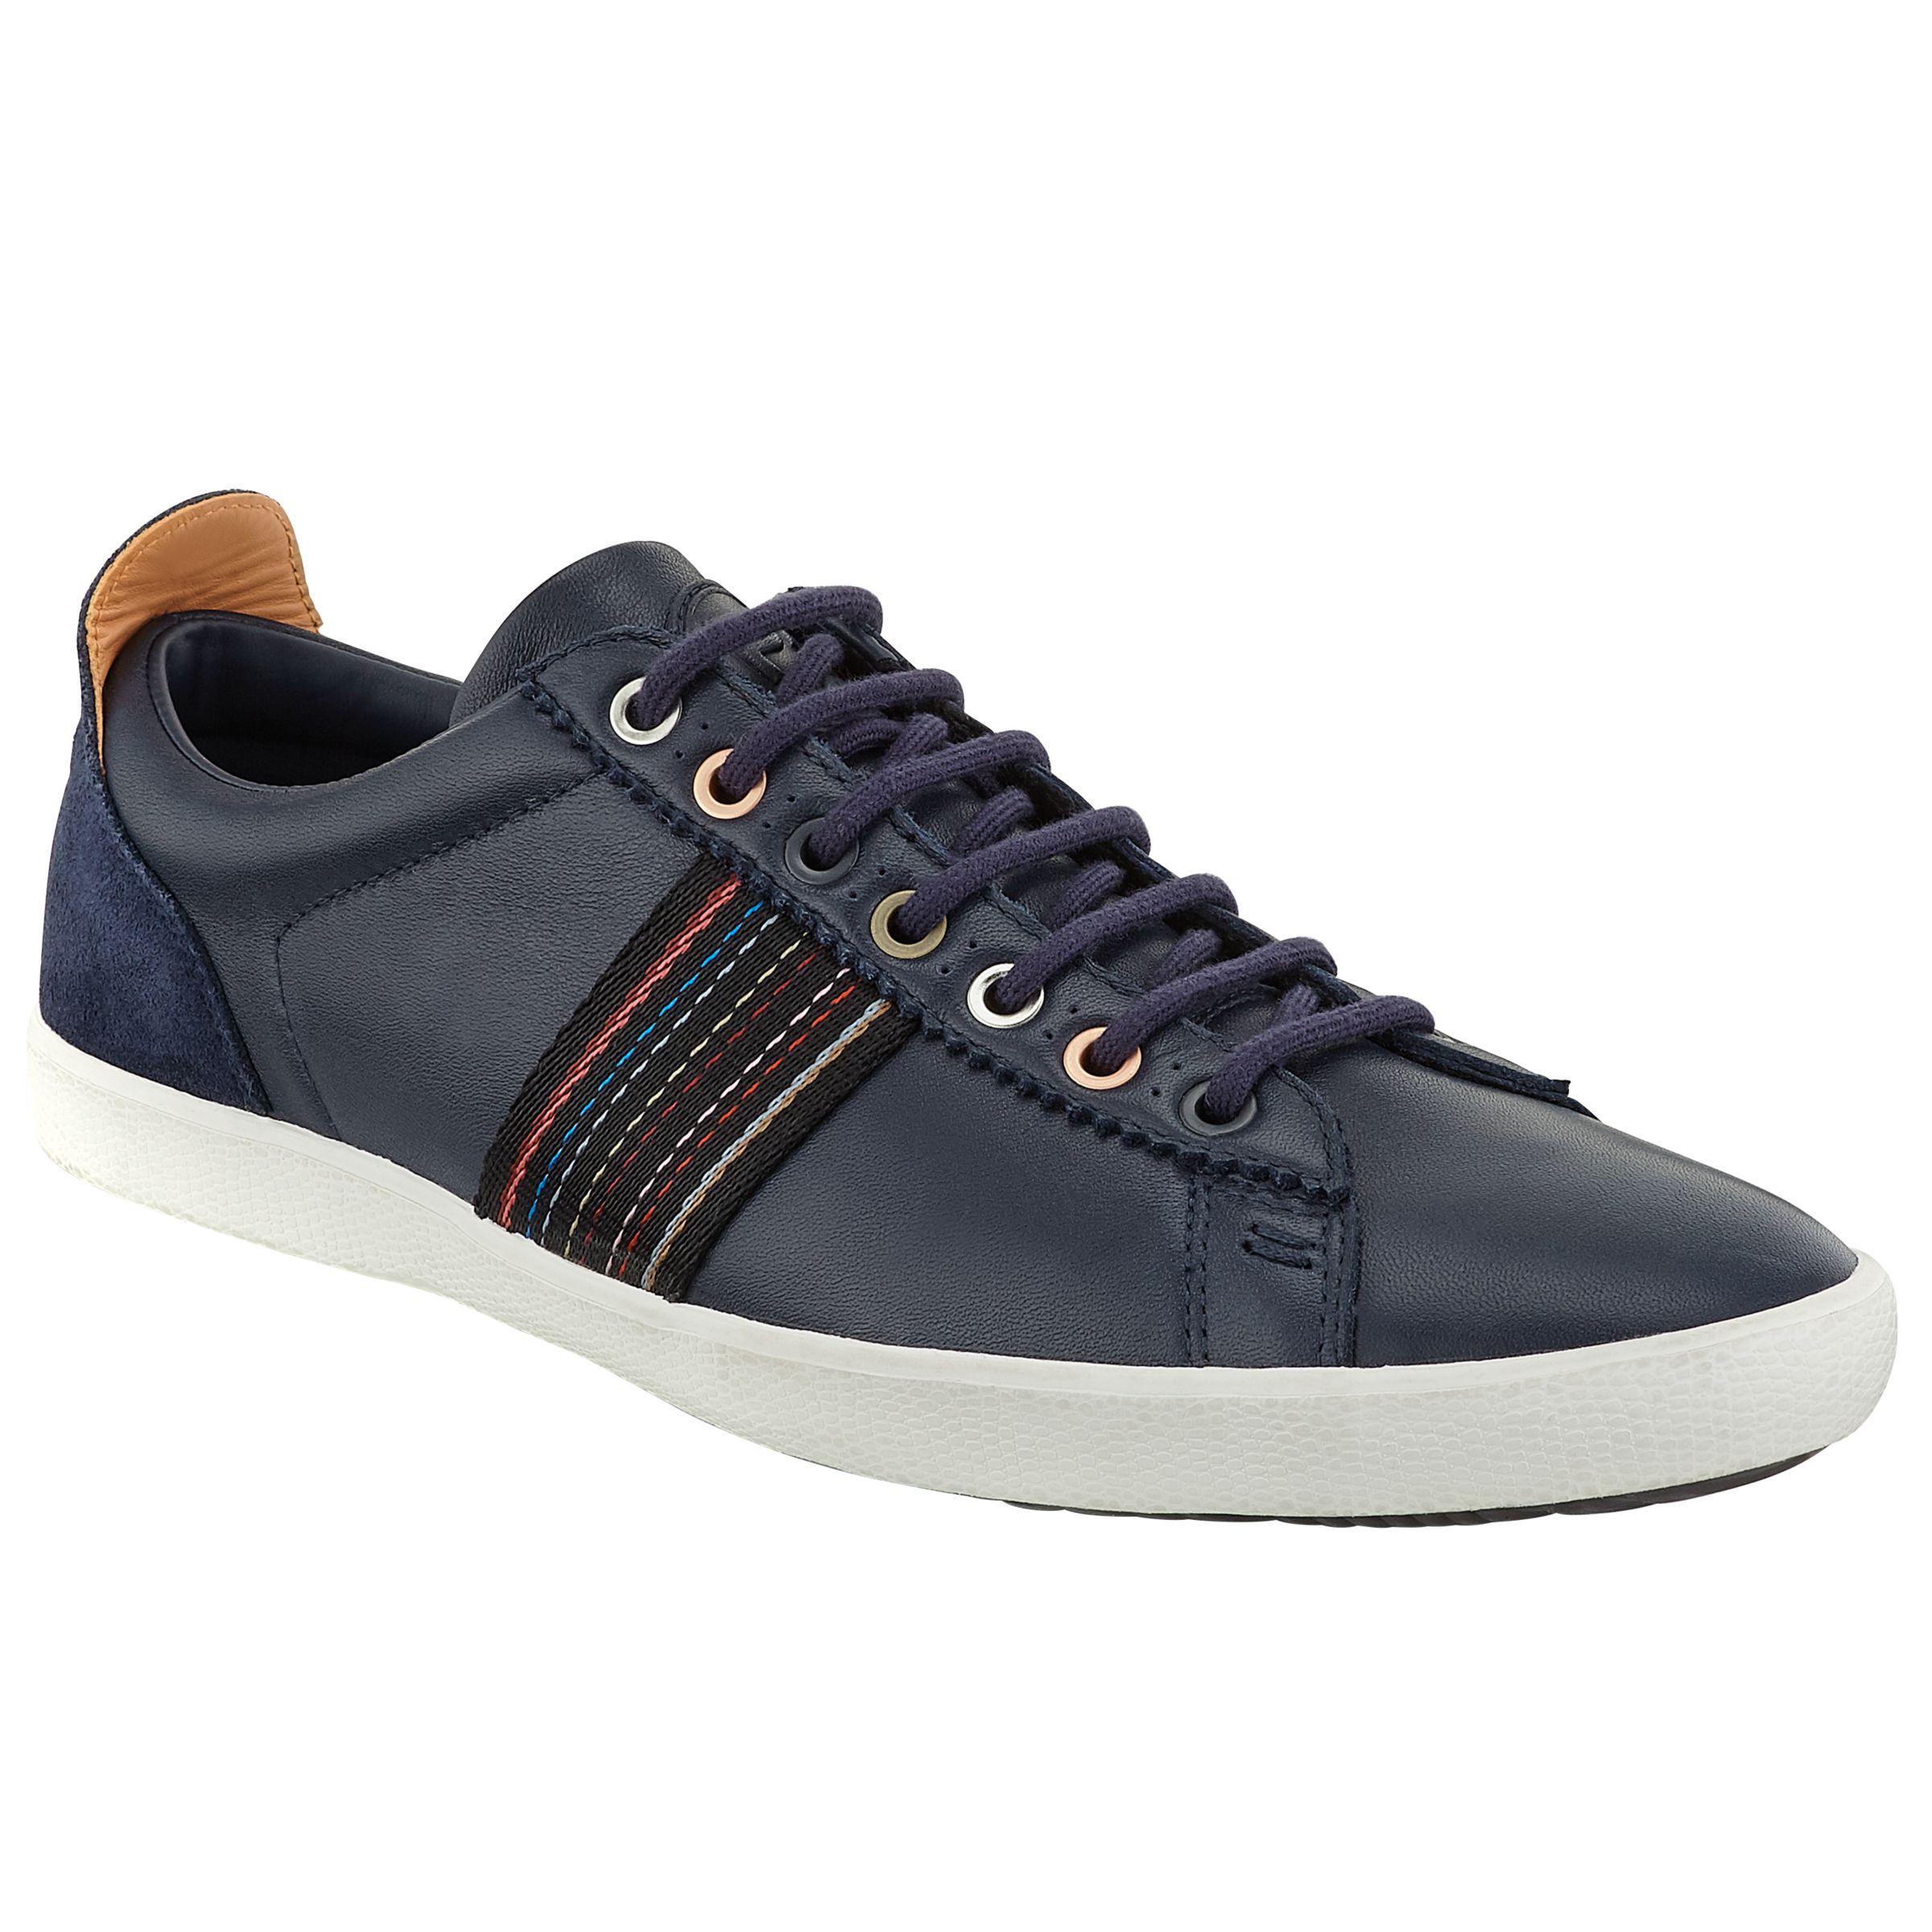 Paul Smith Mlux Osmo Trainers, Navy